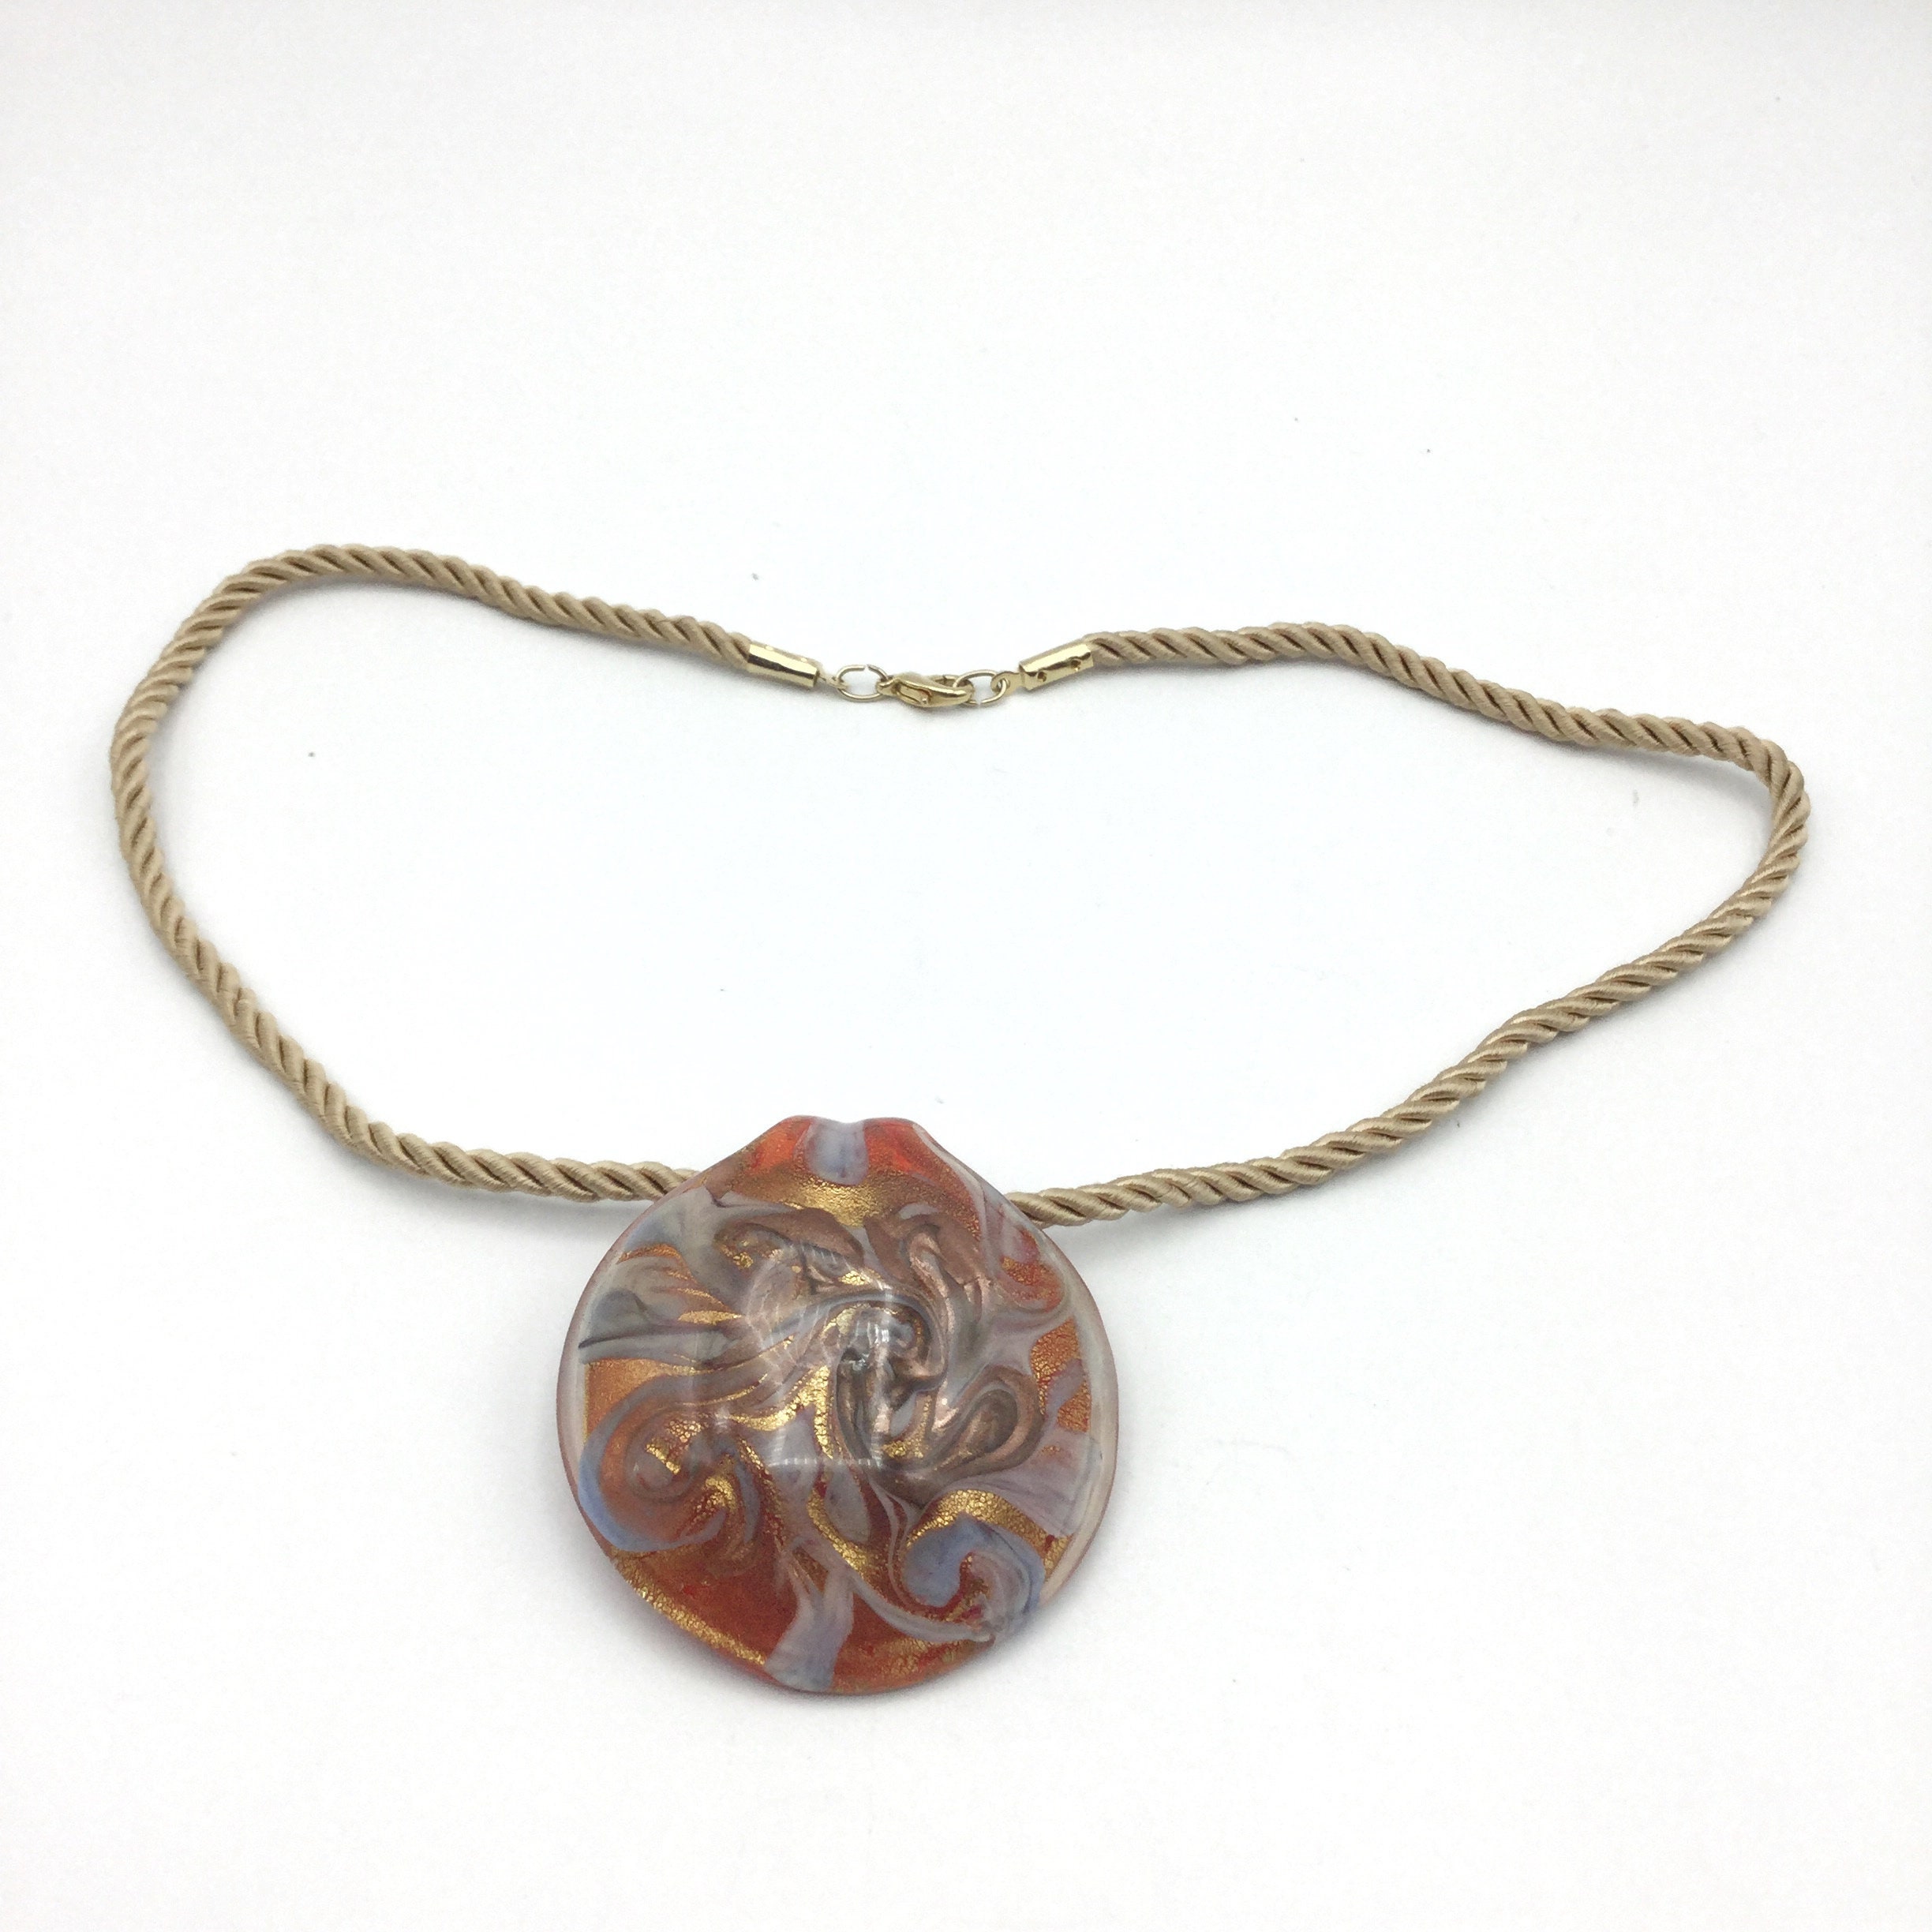 Murano Glass Pendant on Gold Plated Rope Chain--M